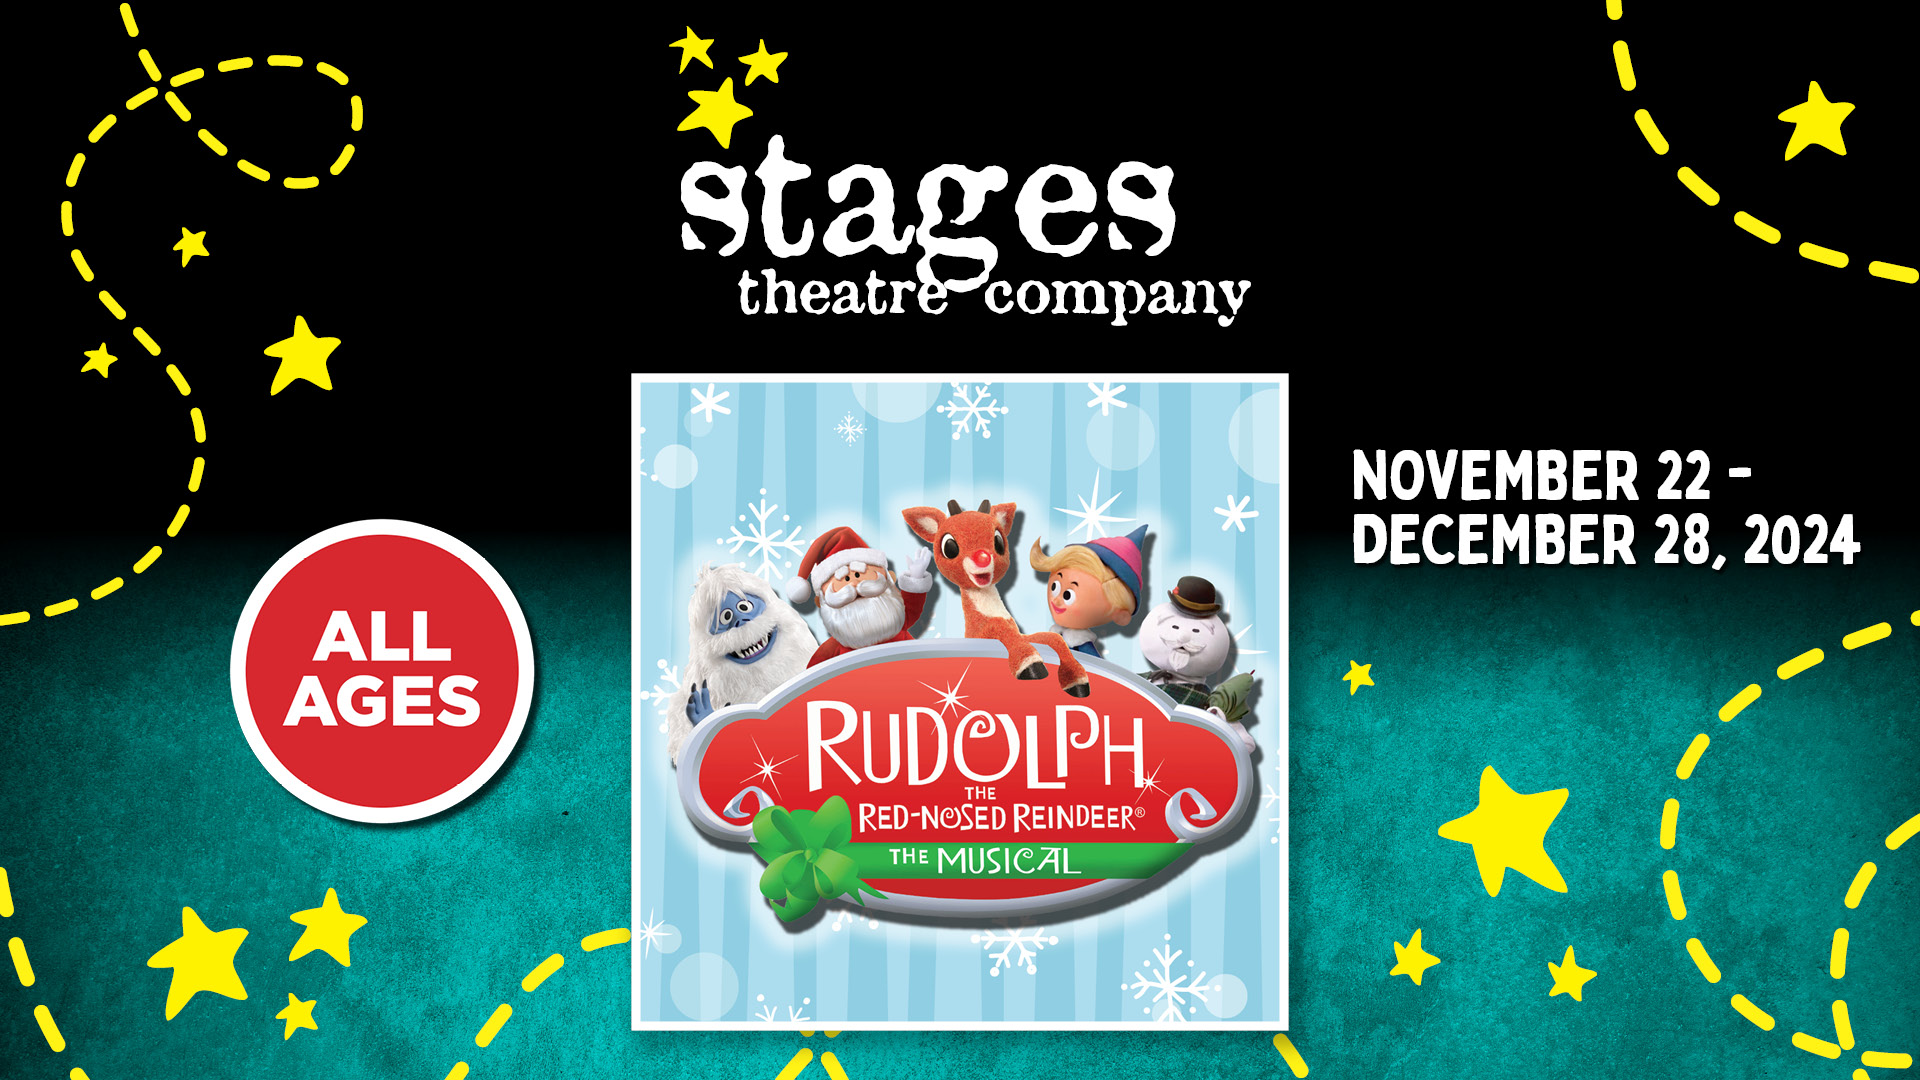 Rudolph the Red-Nosed Reindeer: The Musical NOVEMBER 22 - DECEMBER 28, 2024